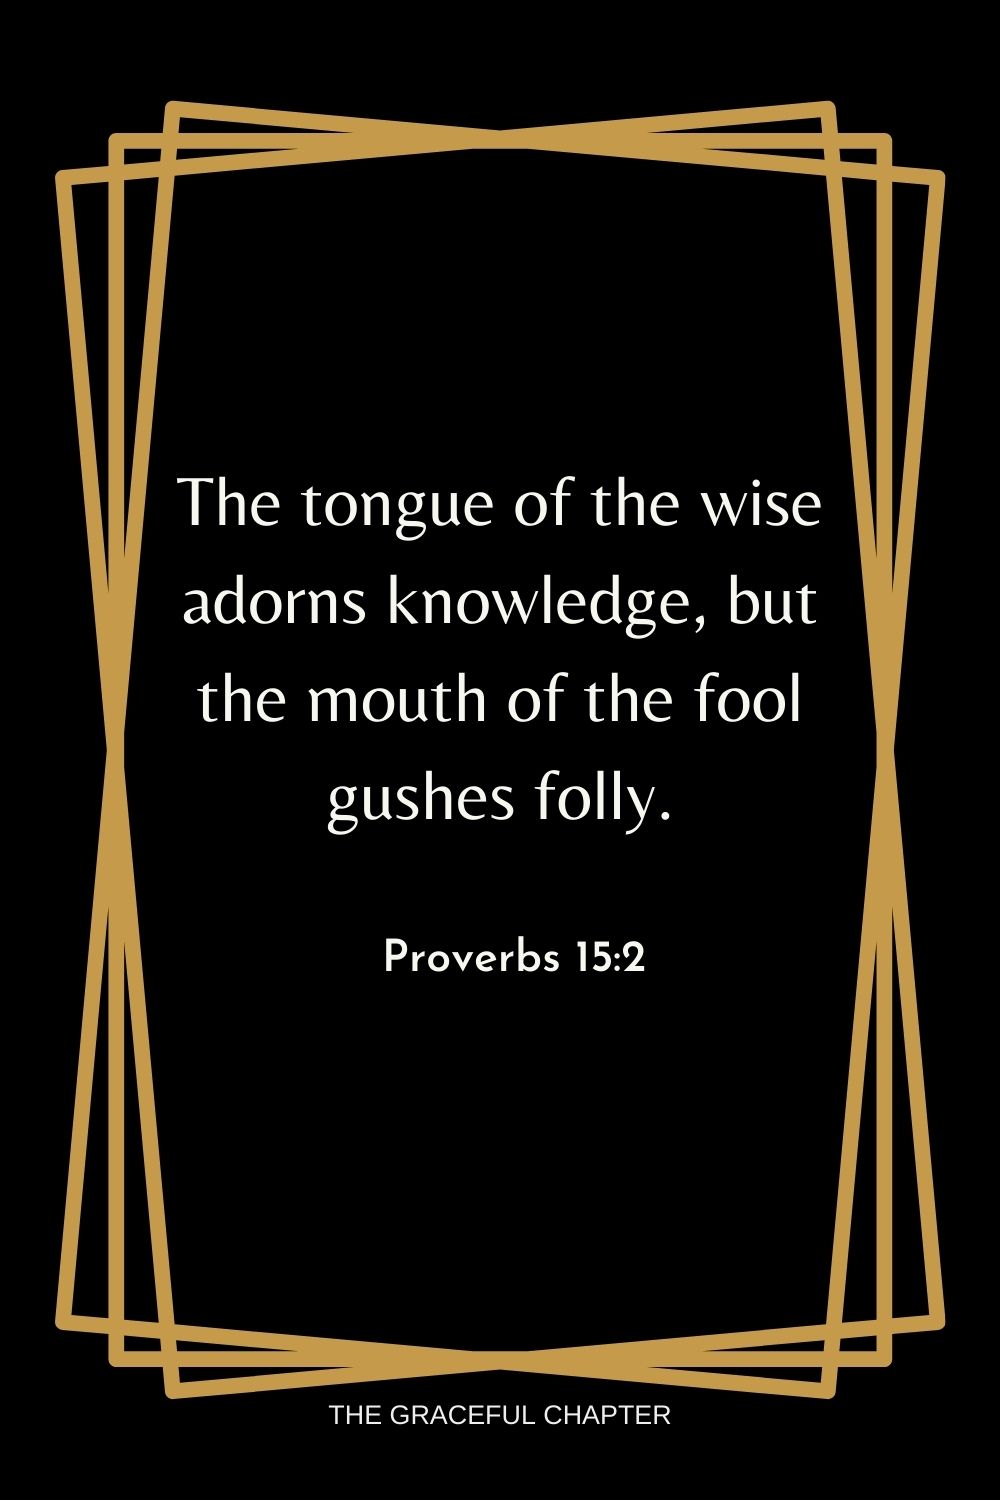 The tongue of the wise adorns knowledge, but the mouth of the fool gushes folly. Proverbs 15:2